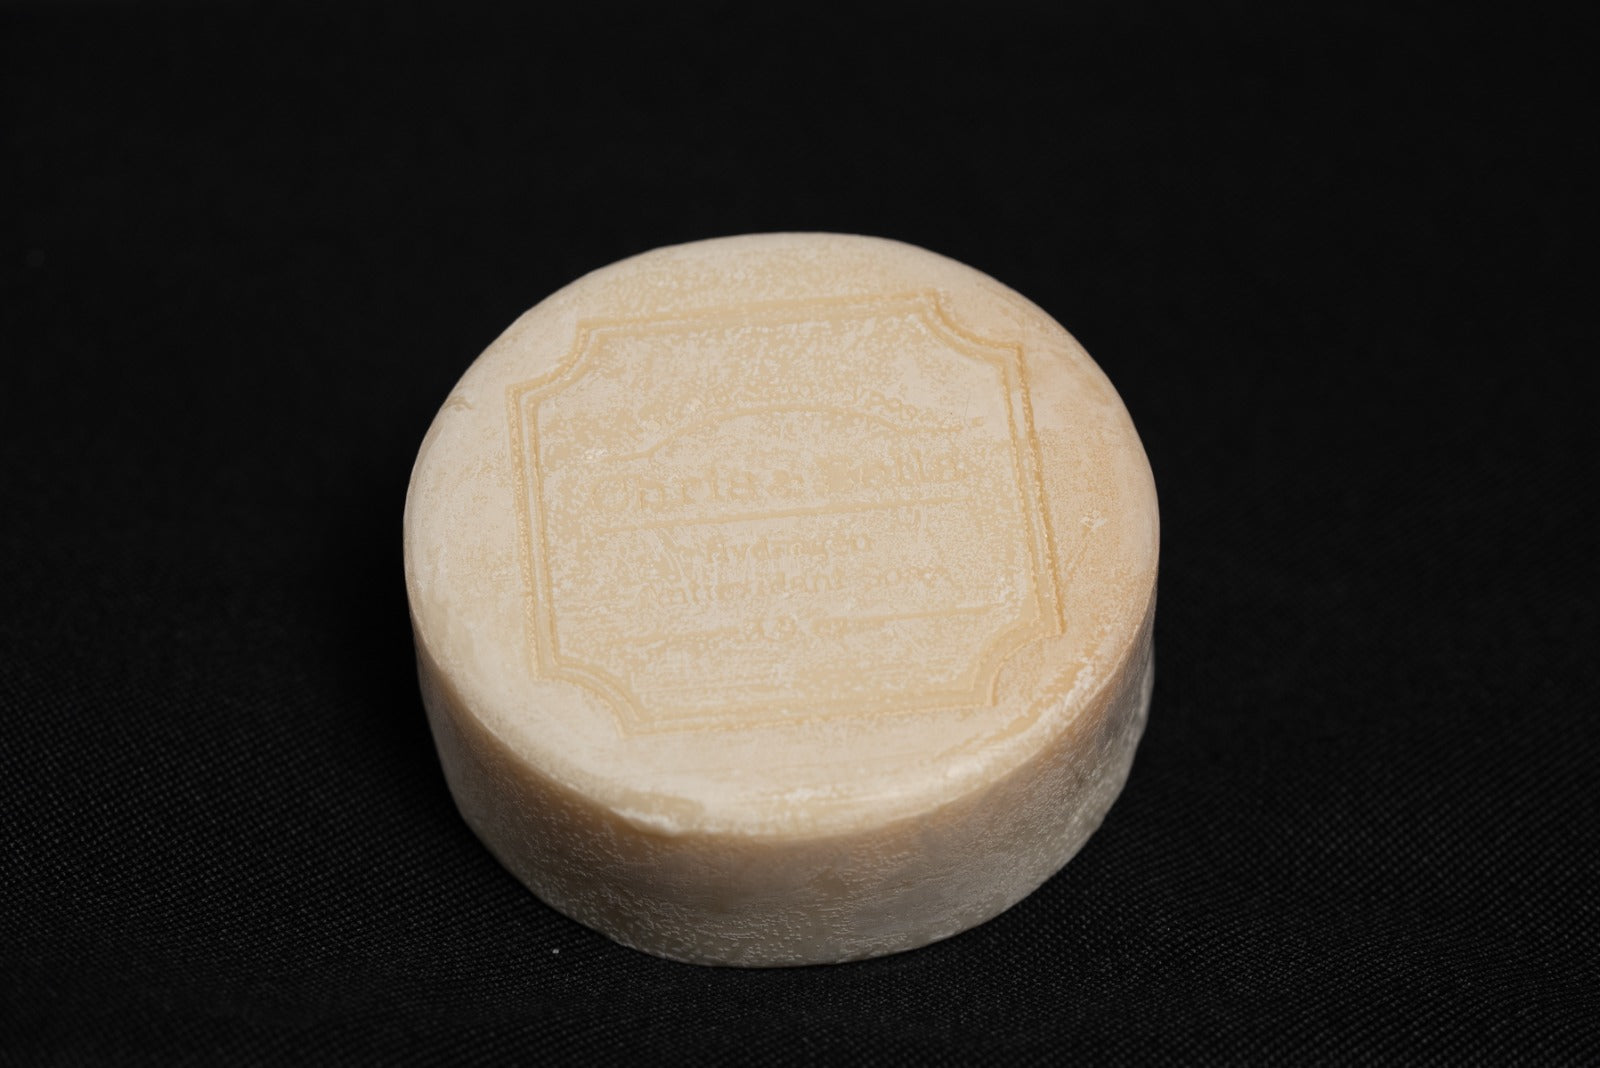 Heartyculture Aha Hydrogen Soap